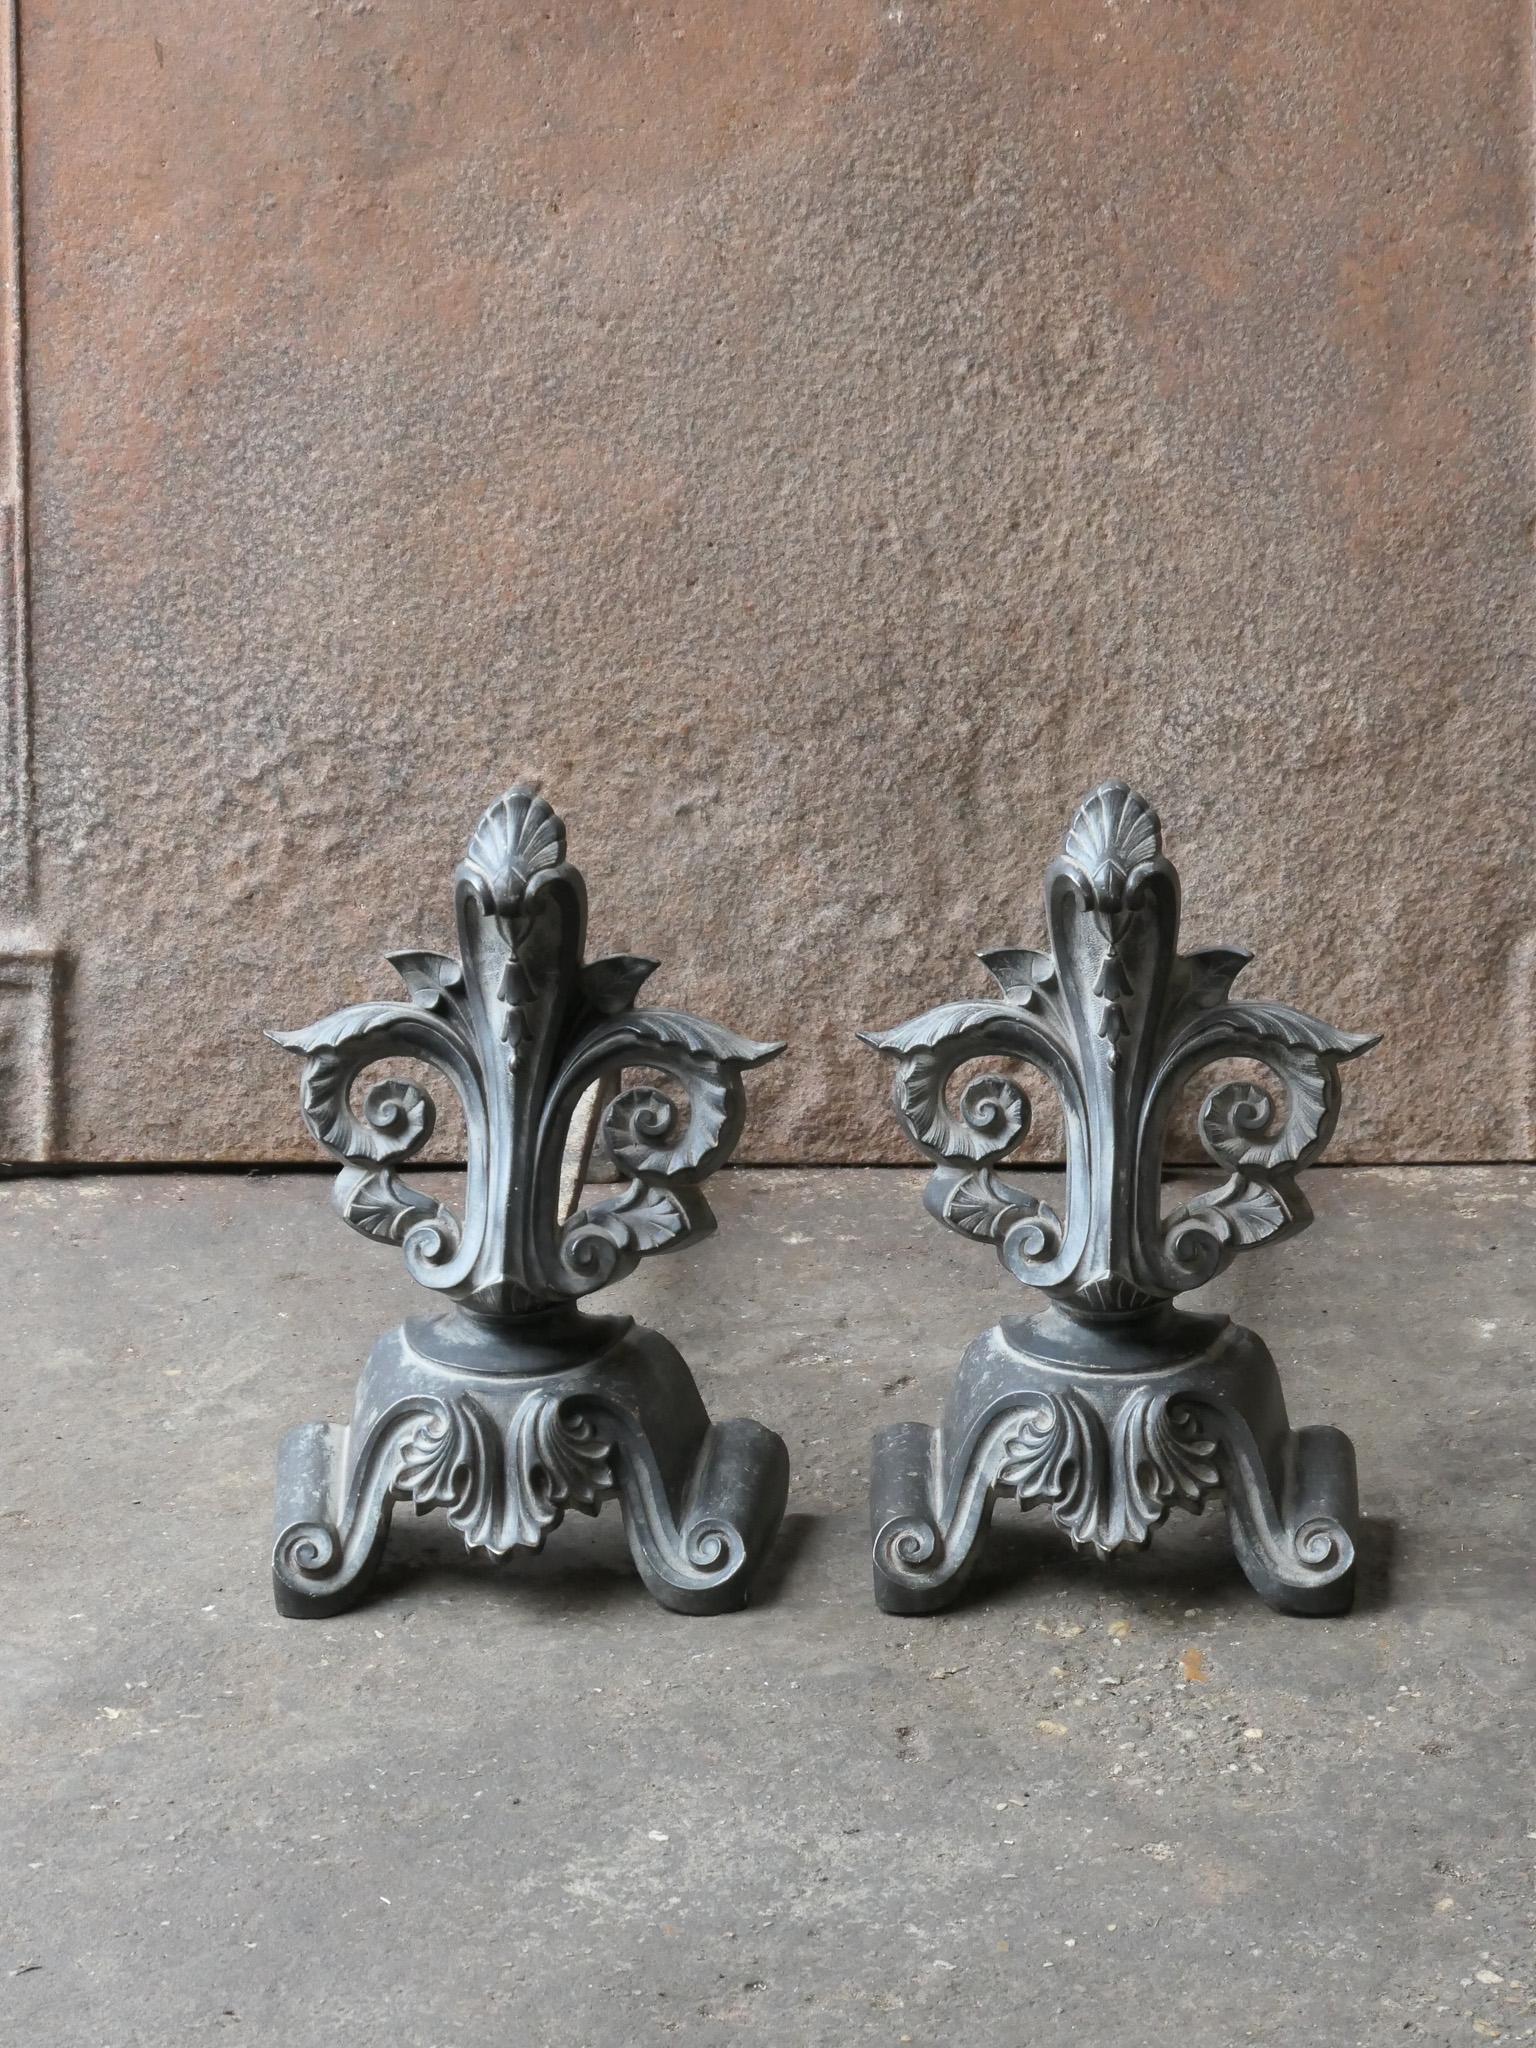 19th century French Napoleon III period andirons. The andirons are made of brass and wrought iron and are in a good condition.

.